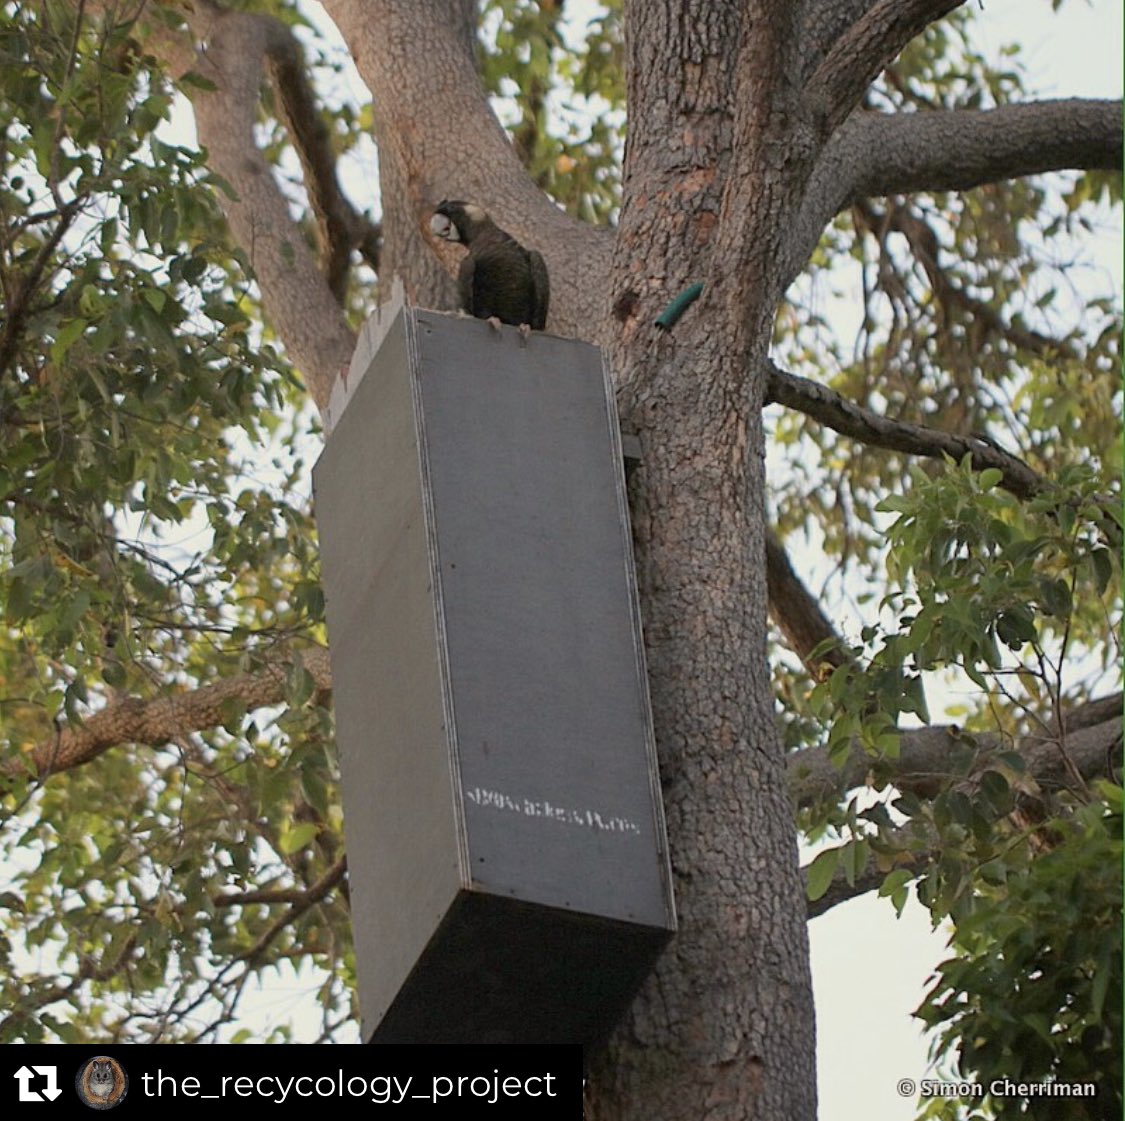 Carnaby’s Black-Cockatoo using a ‘giant’ nest box - over 1m deep! There’s been excellent long-term research in West Aus into the conservation of this beautiful species. Loss of nesting & foraging habitat is the cause of the decline of these beauties Thx @Aquila84WA